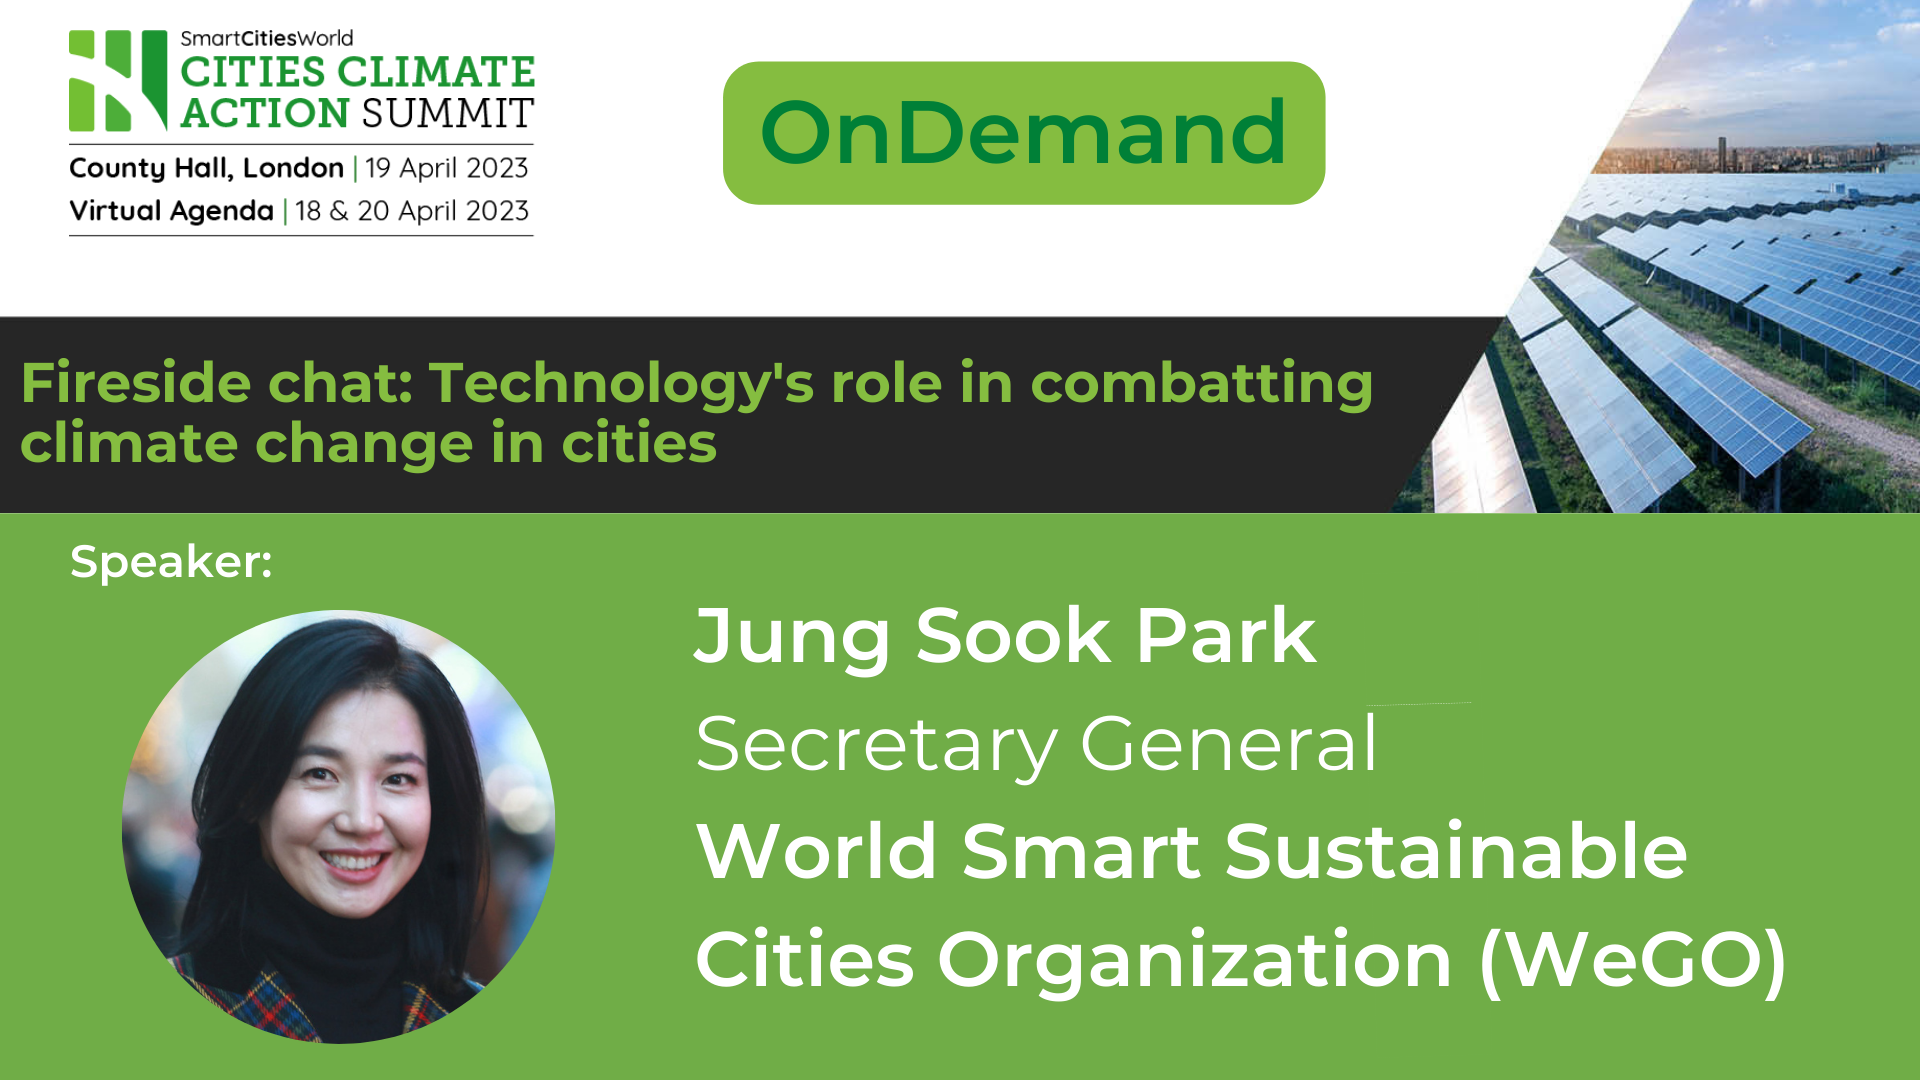 OnDemand Fireside chat: Technology's role in combatting climate change